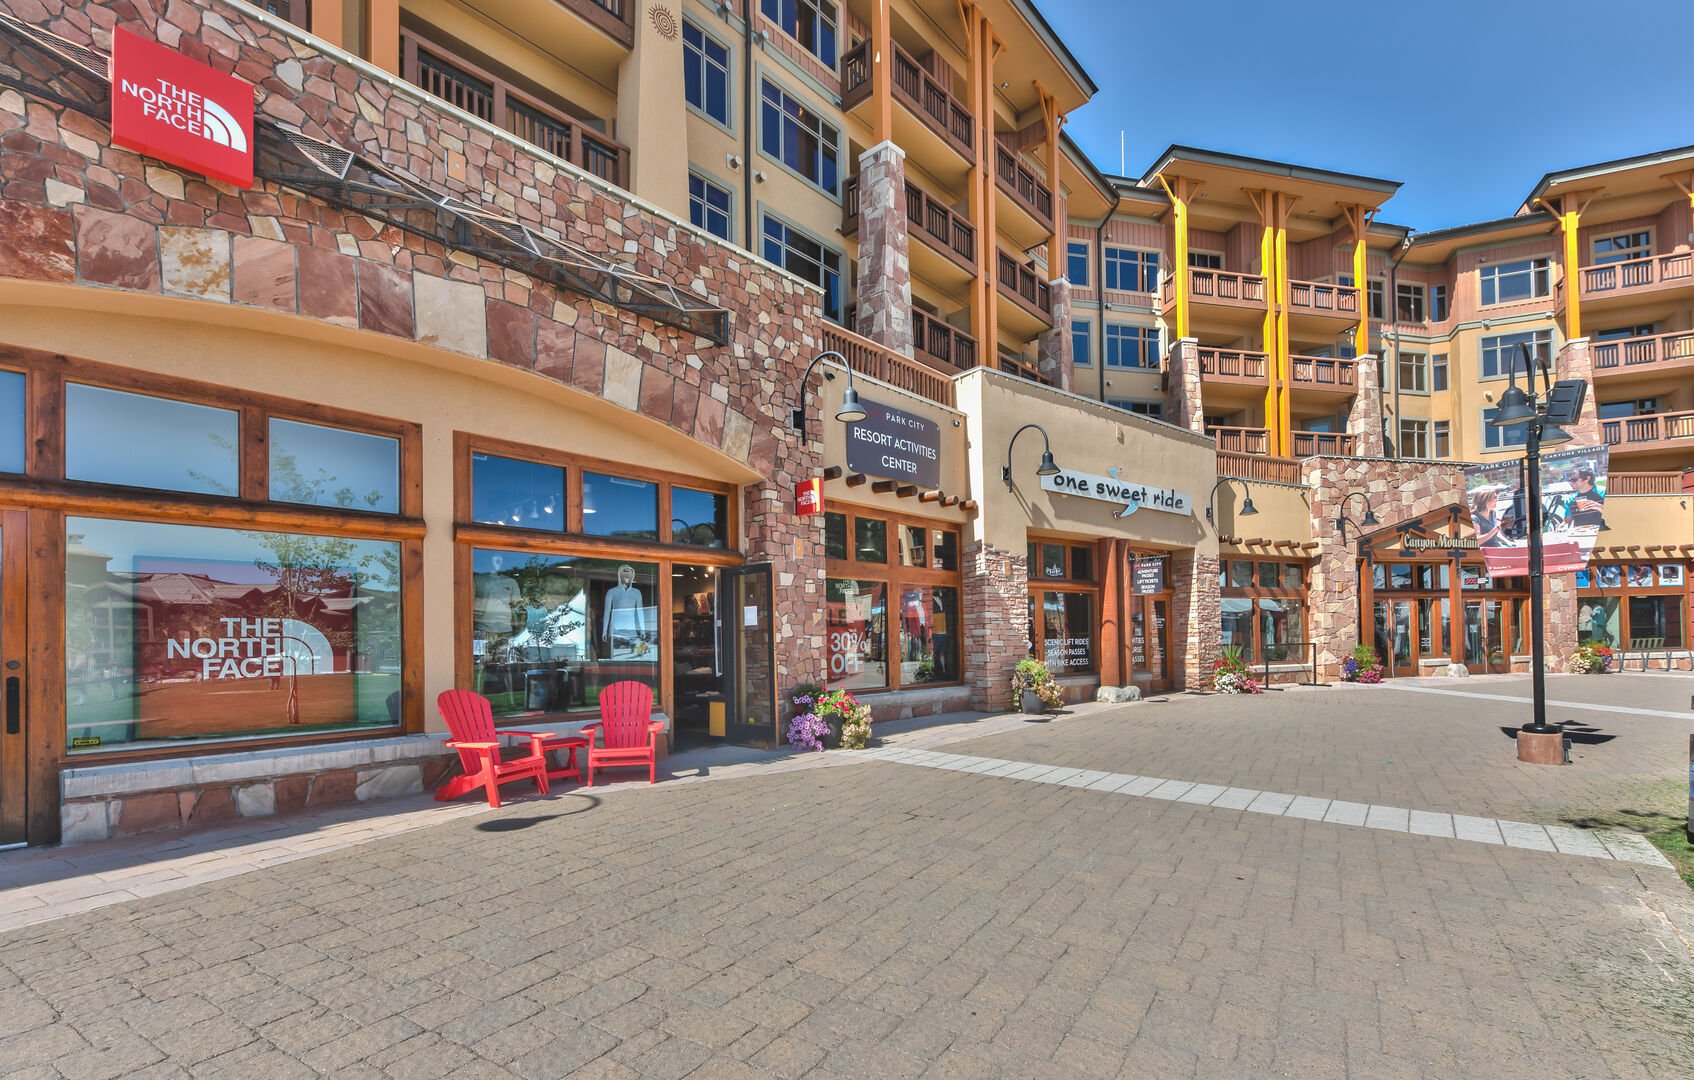 resort ski school, ski rentals and ski shop are all within the property (just downstairs)